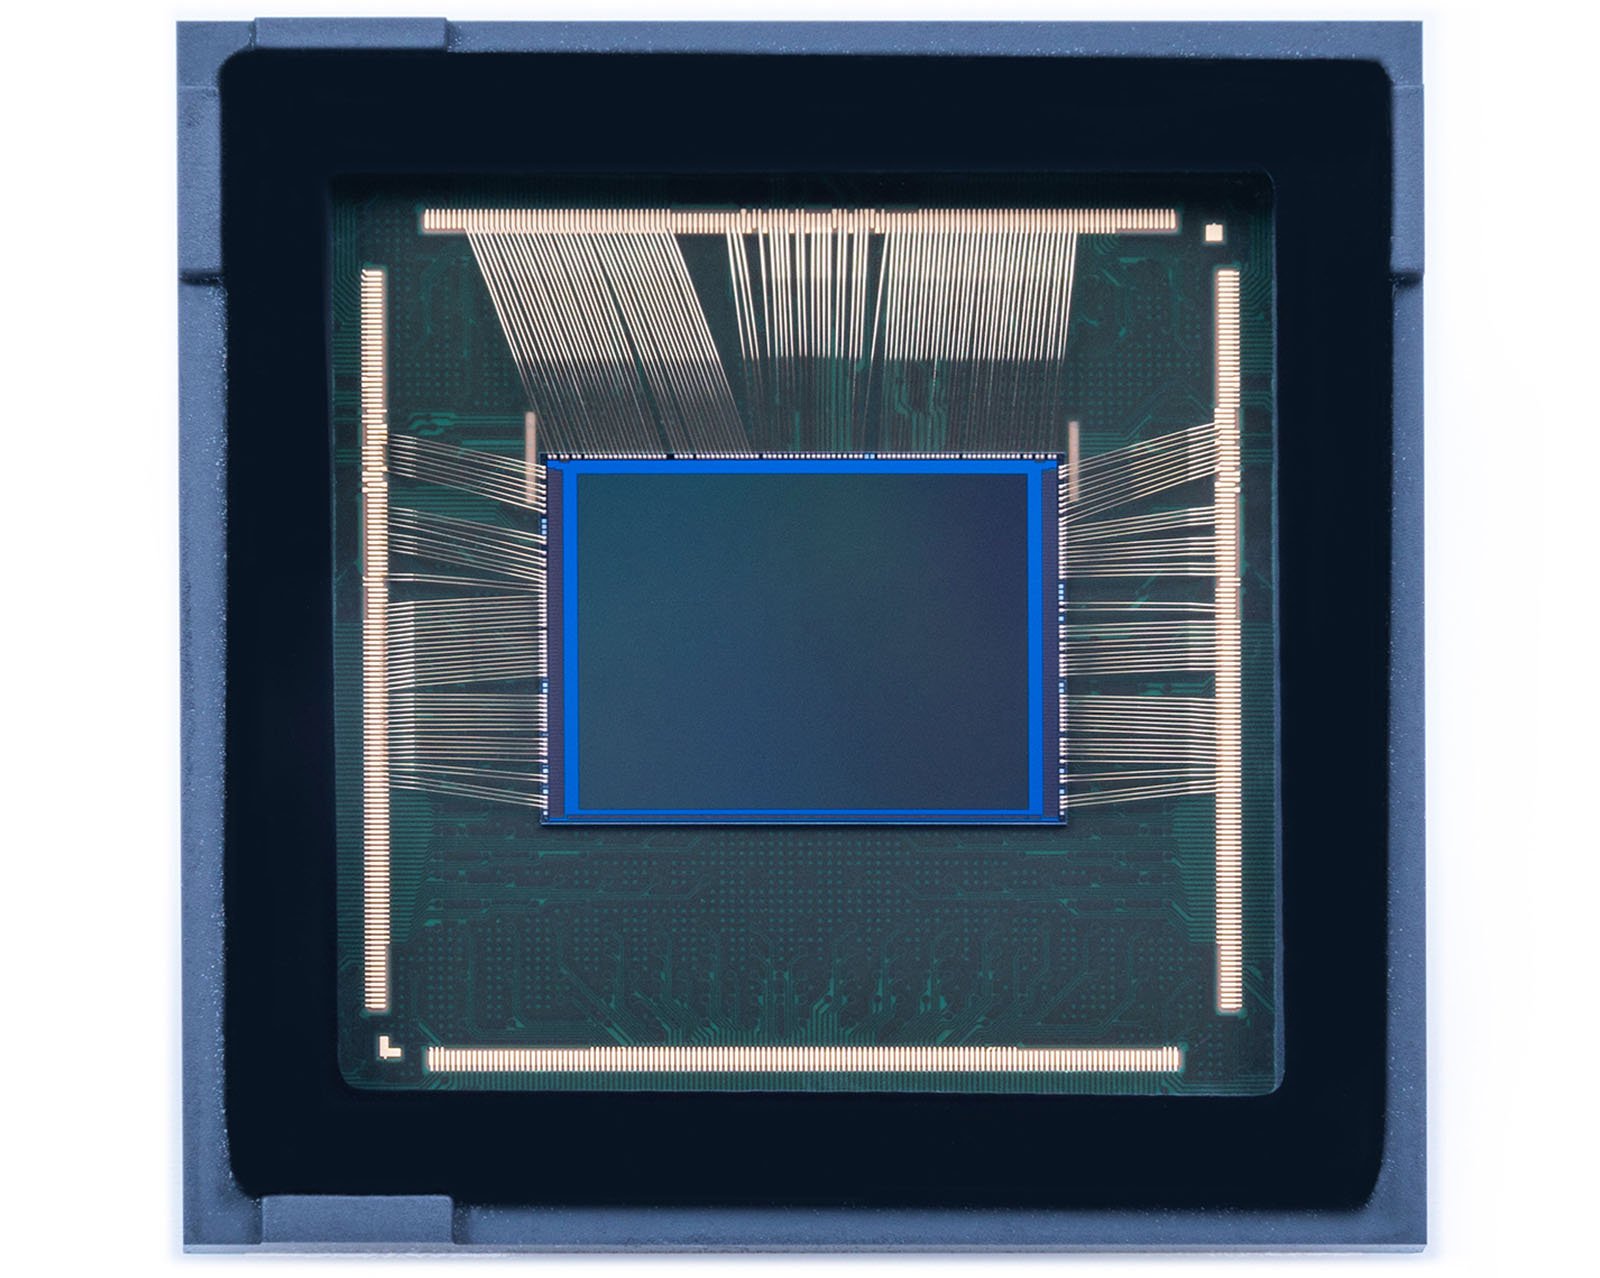 Close-up view of a semiconductor chip with visible wiring connections. The square black and green structure has fine gold wires extending from its edges to the surrounding frame. The central area is flat and framed with a blue outline.